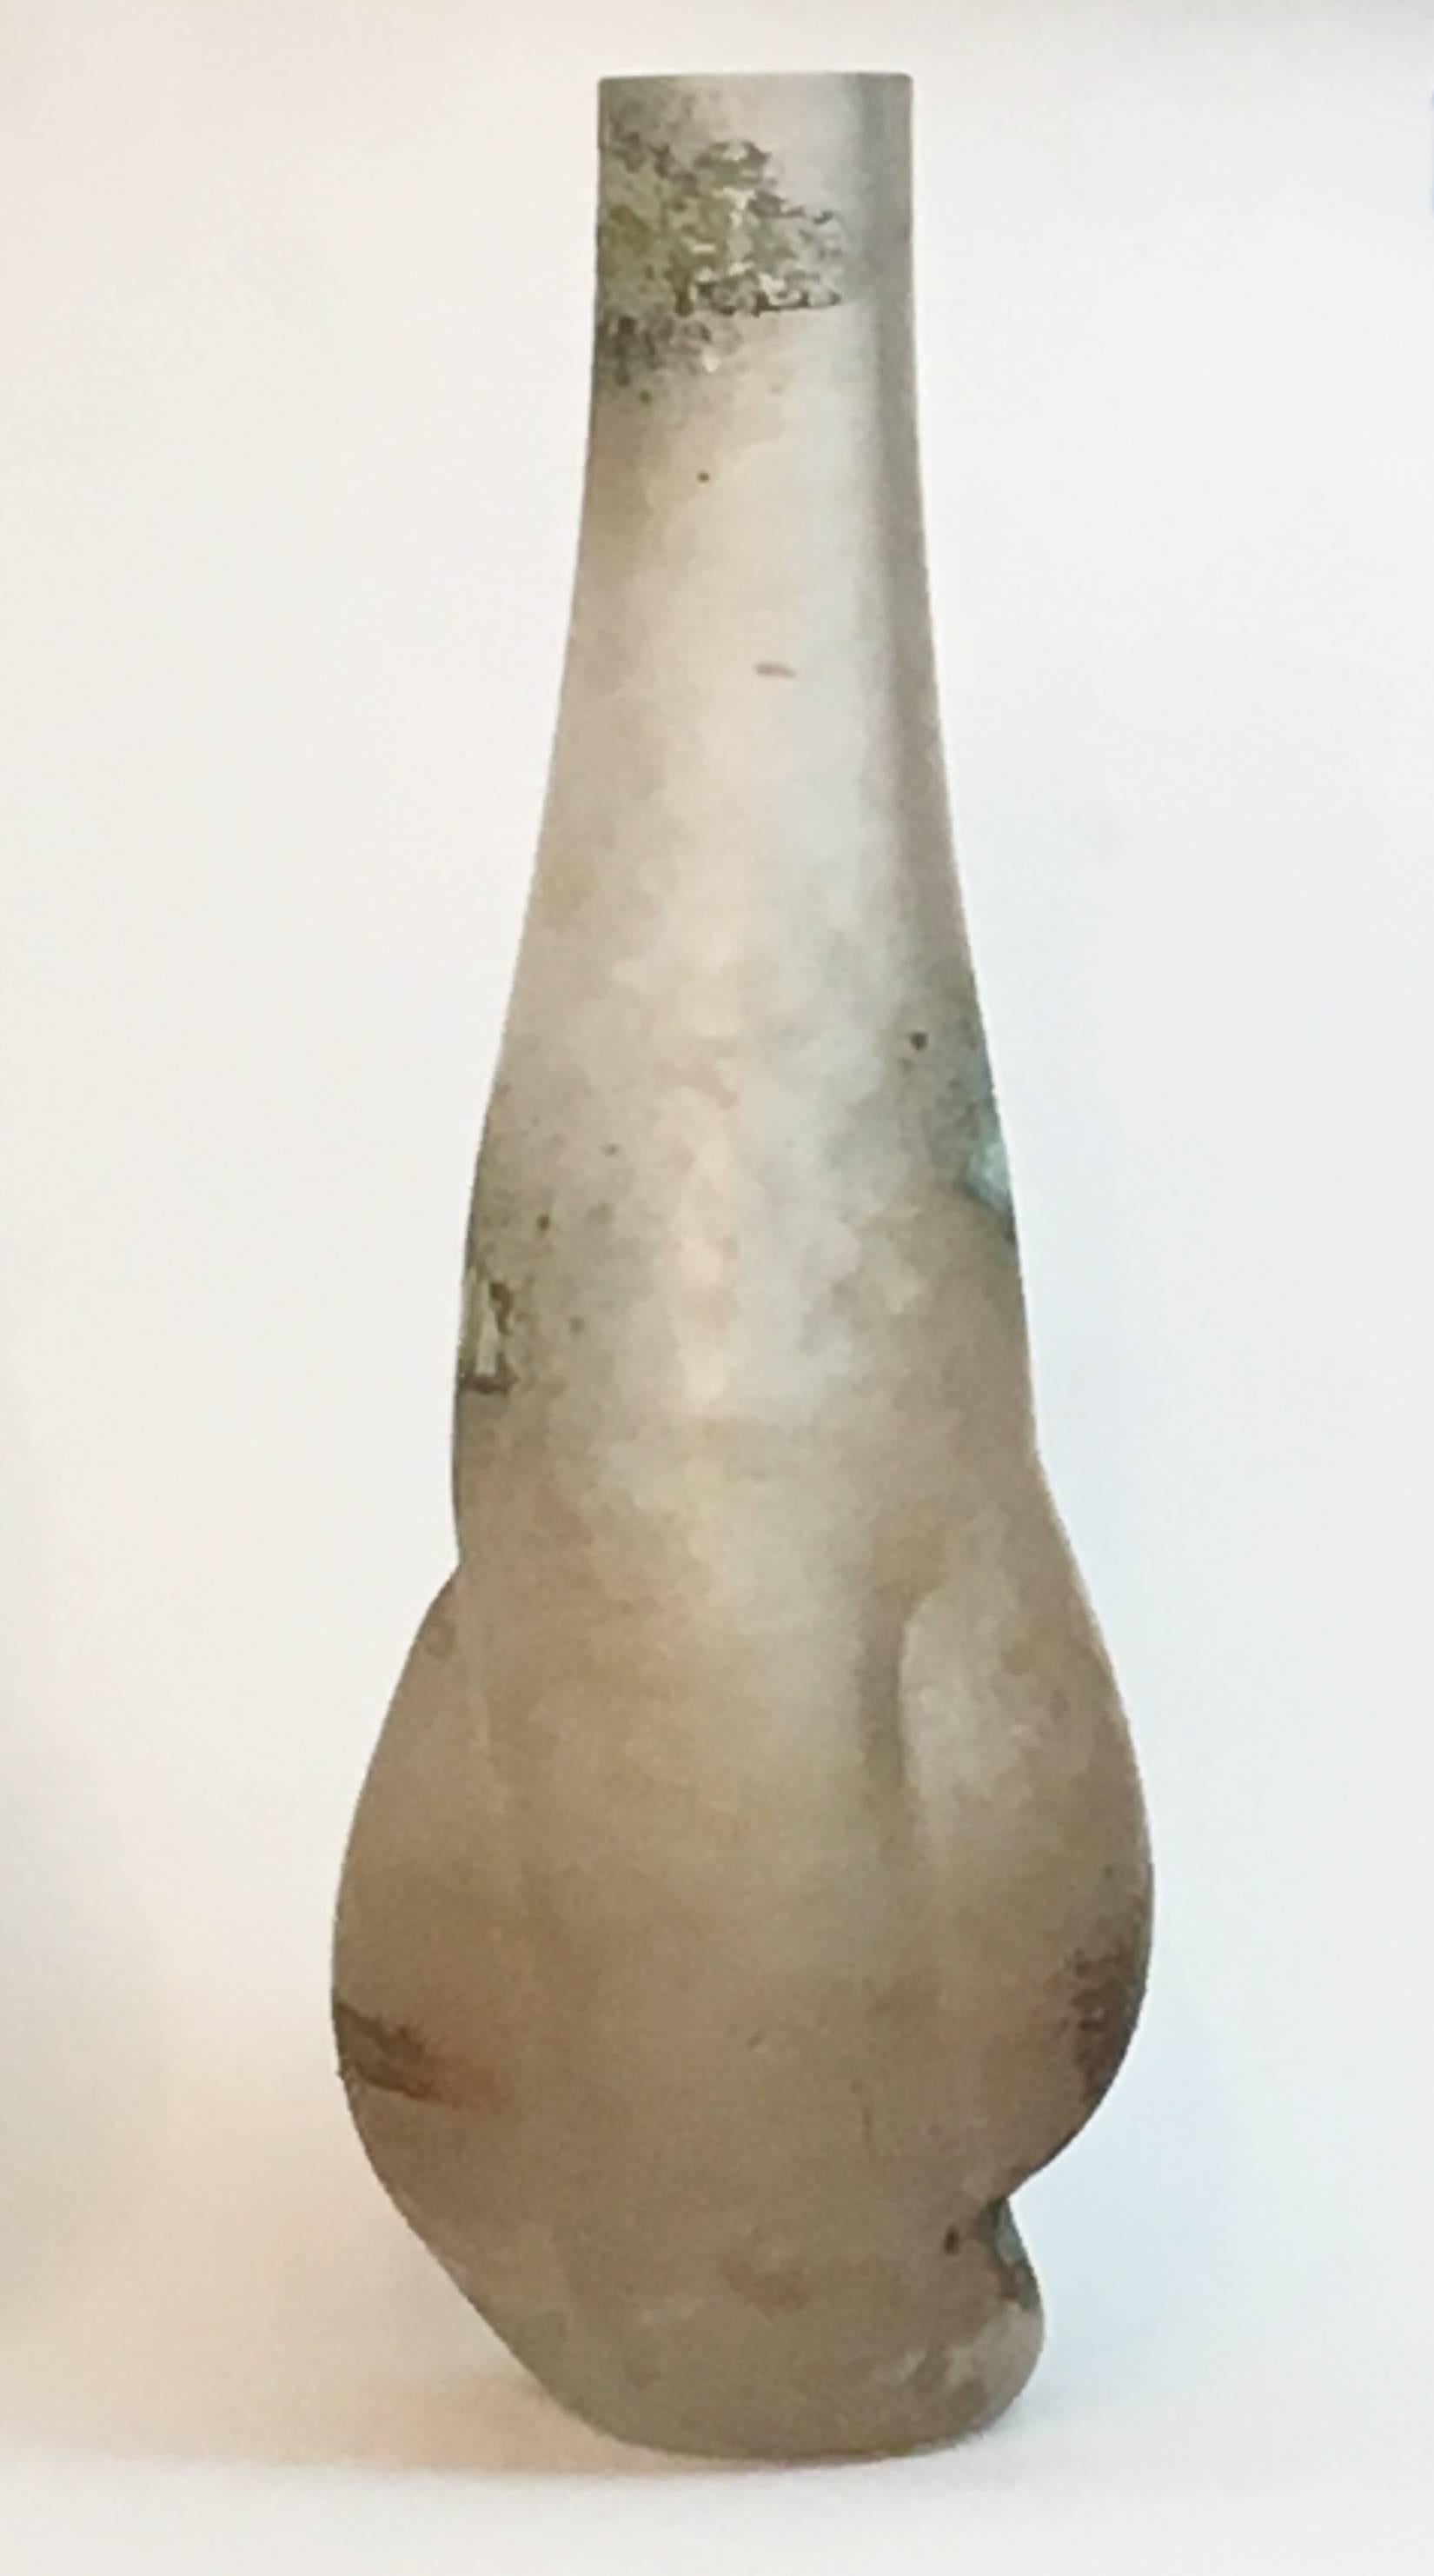 A very large Murano glass vase by Cenedese in the scavo technique, with iron oxide areas on a clear to amber background.